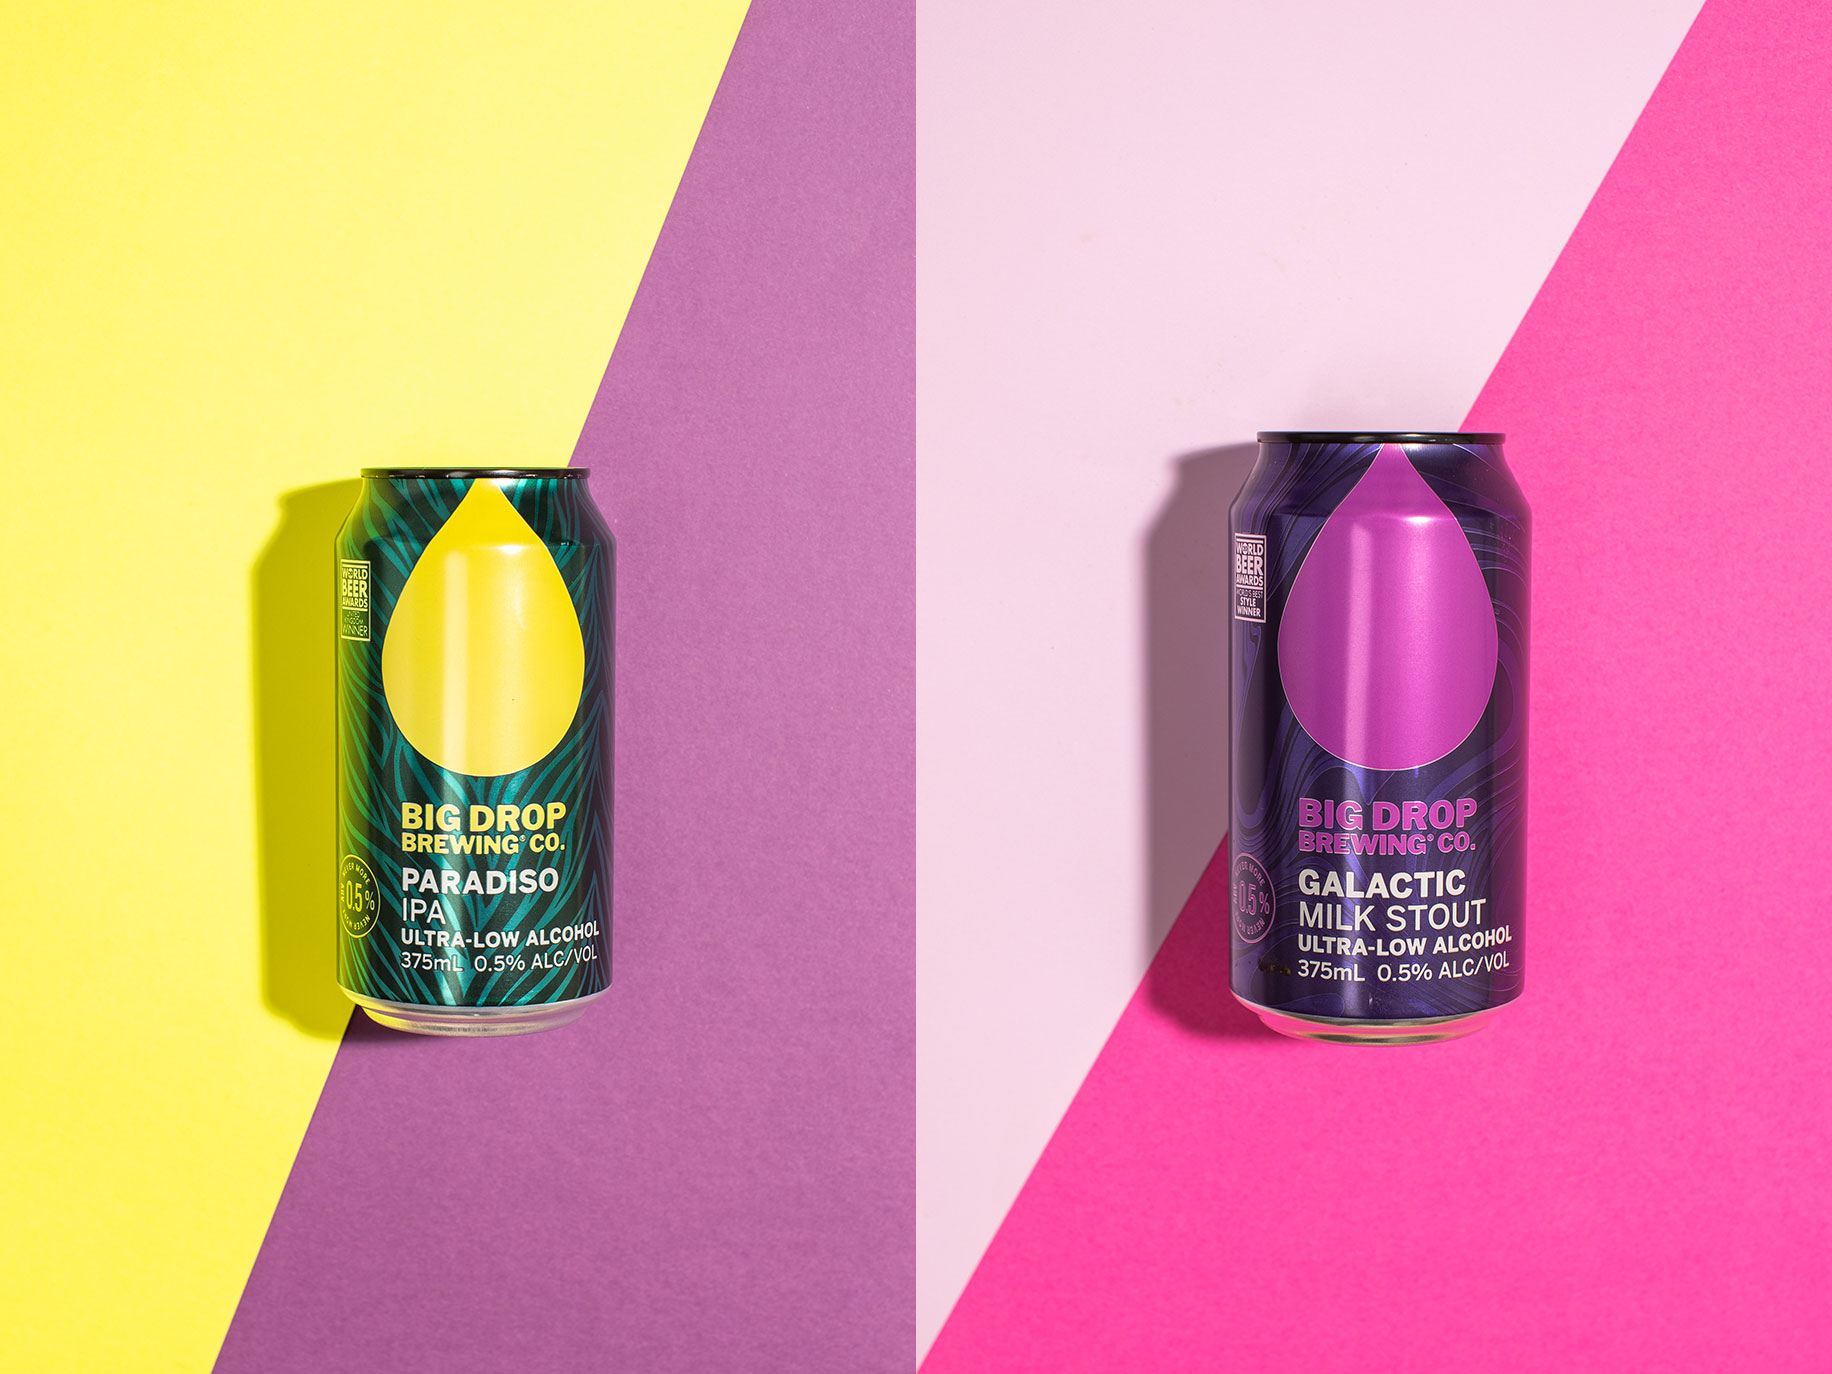 Big Drop Brewing Co.'s new low alcohol beverages are aromatic and flavour rich